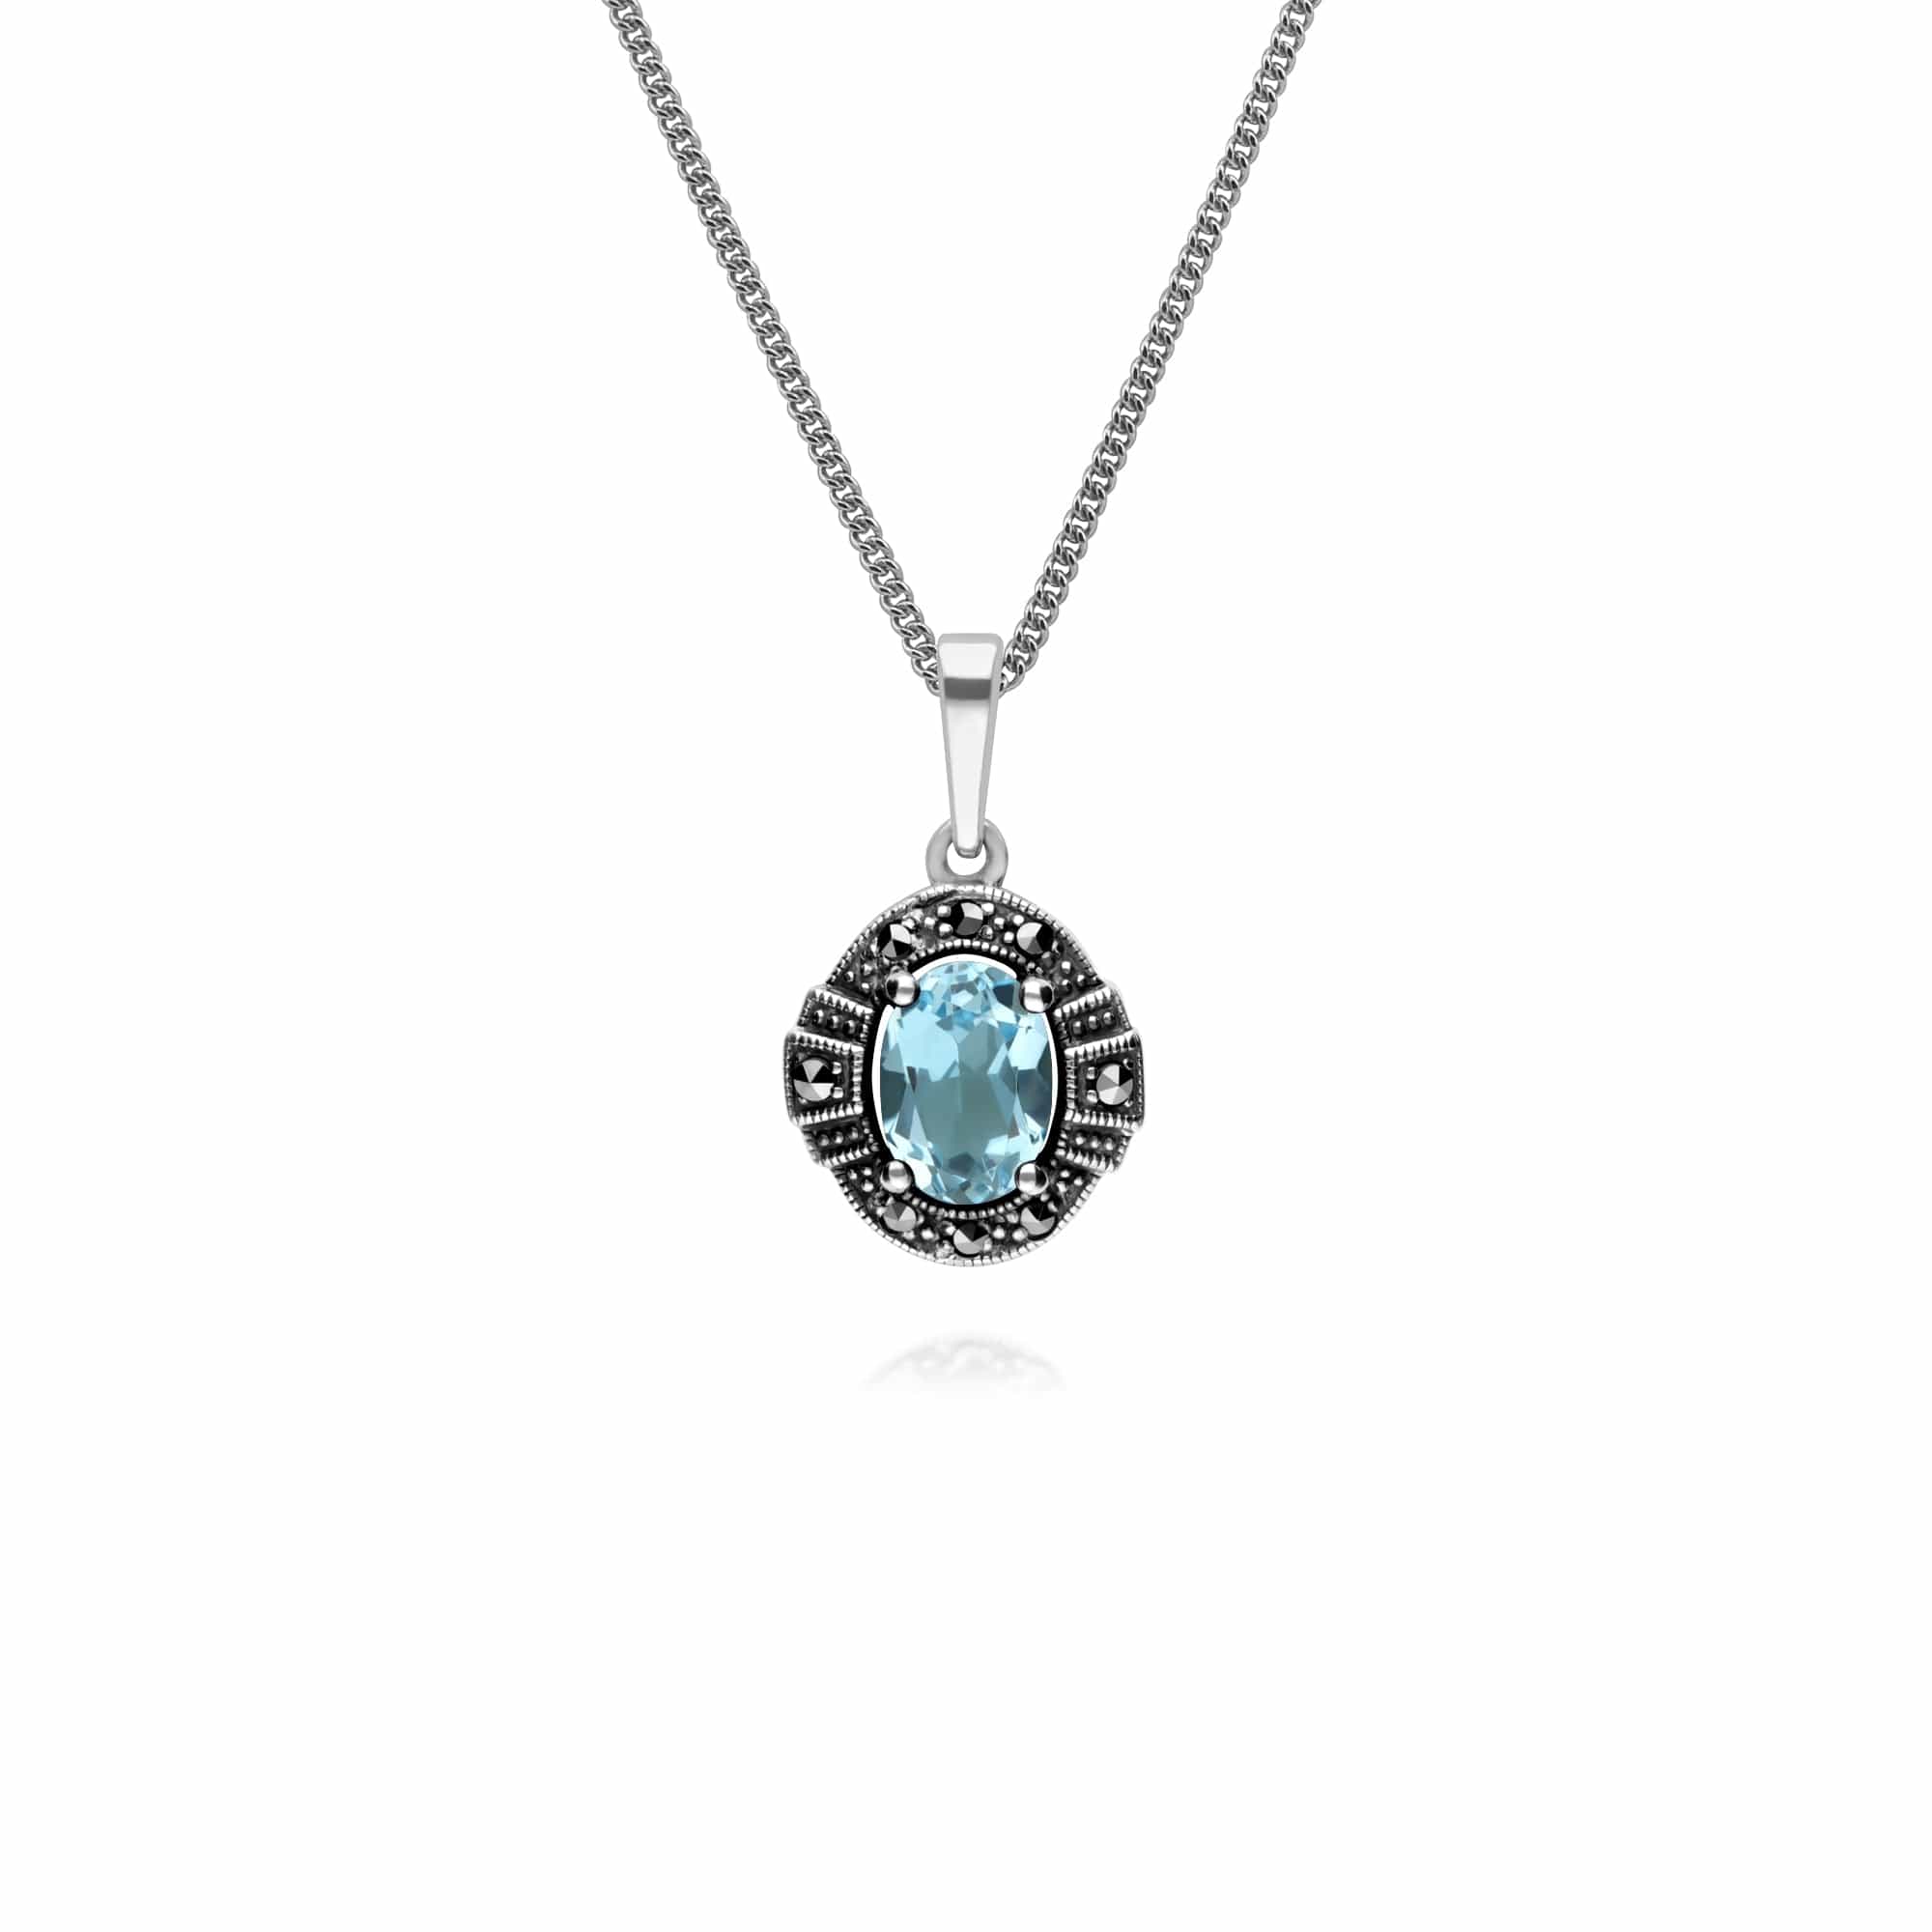 214P303301925-214R605701925 Art Deco Style Oval Blue Topaz and Marcasite Cluster Rings & Pendant Set in 925 Sterling Silver 2